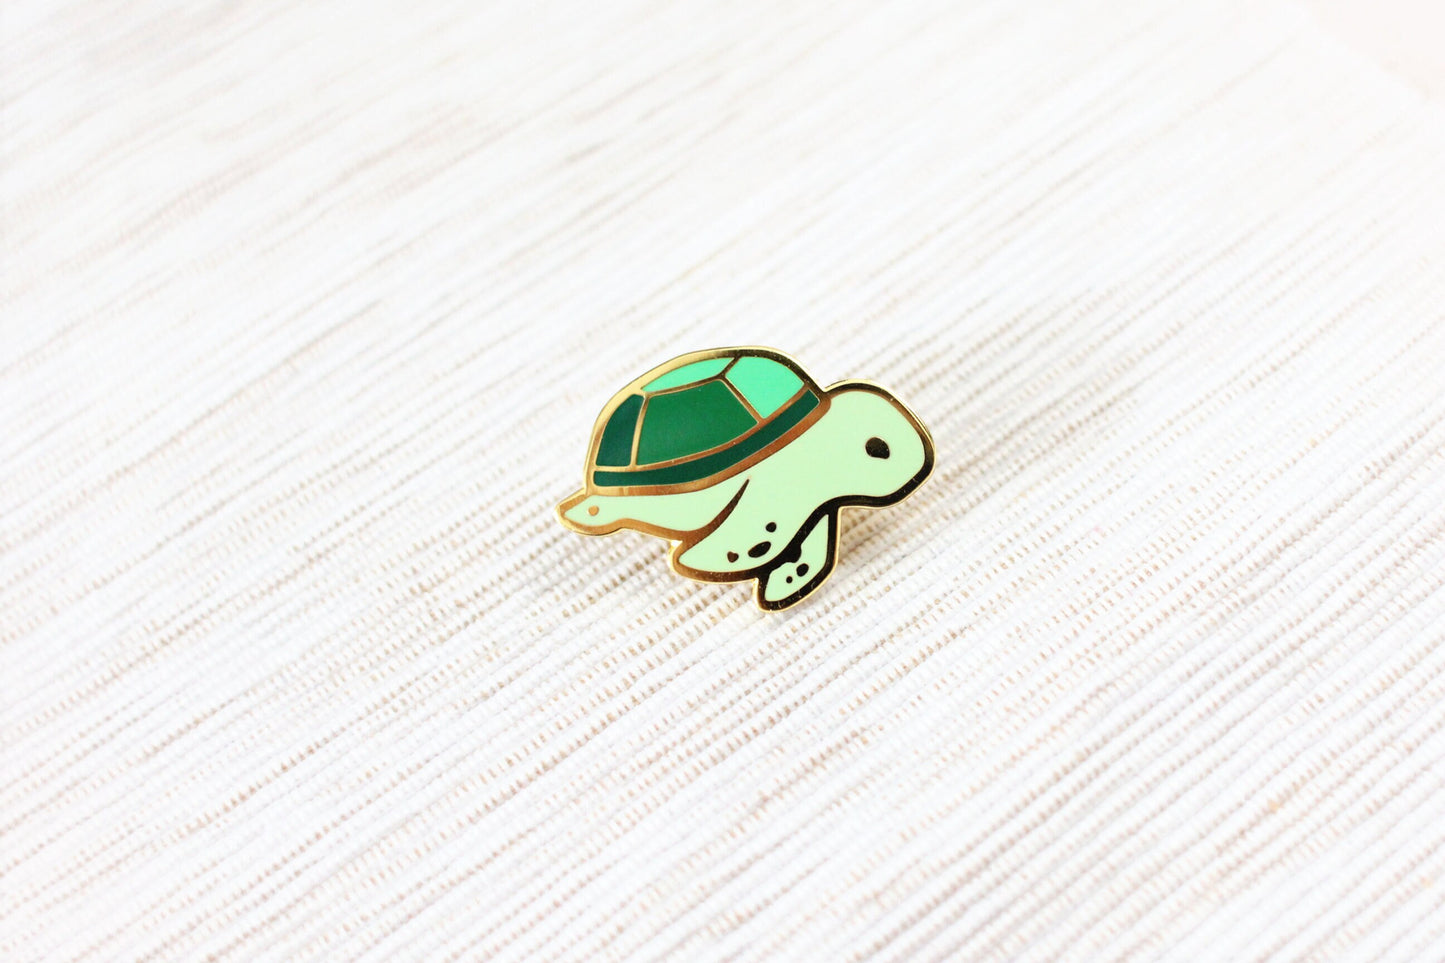 Cute River Turtle | Dreamscape Adventures | Collectors Hard Enamel Pin Badge | Kawaii Aesthetic Birthday Gift for Her | Christmas Present